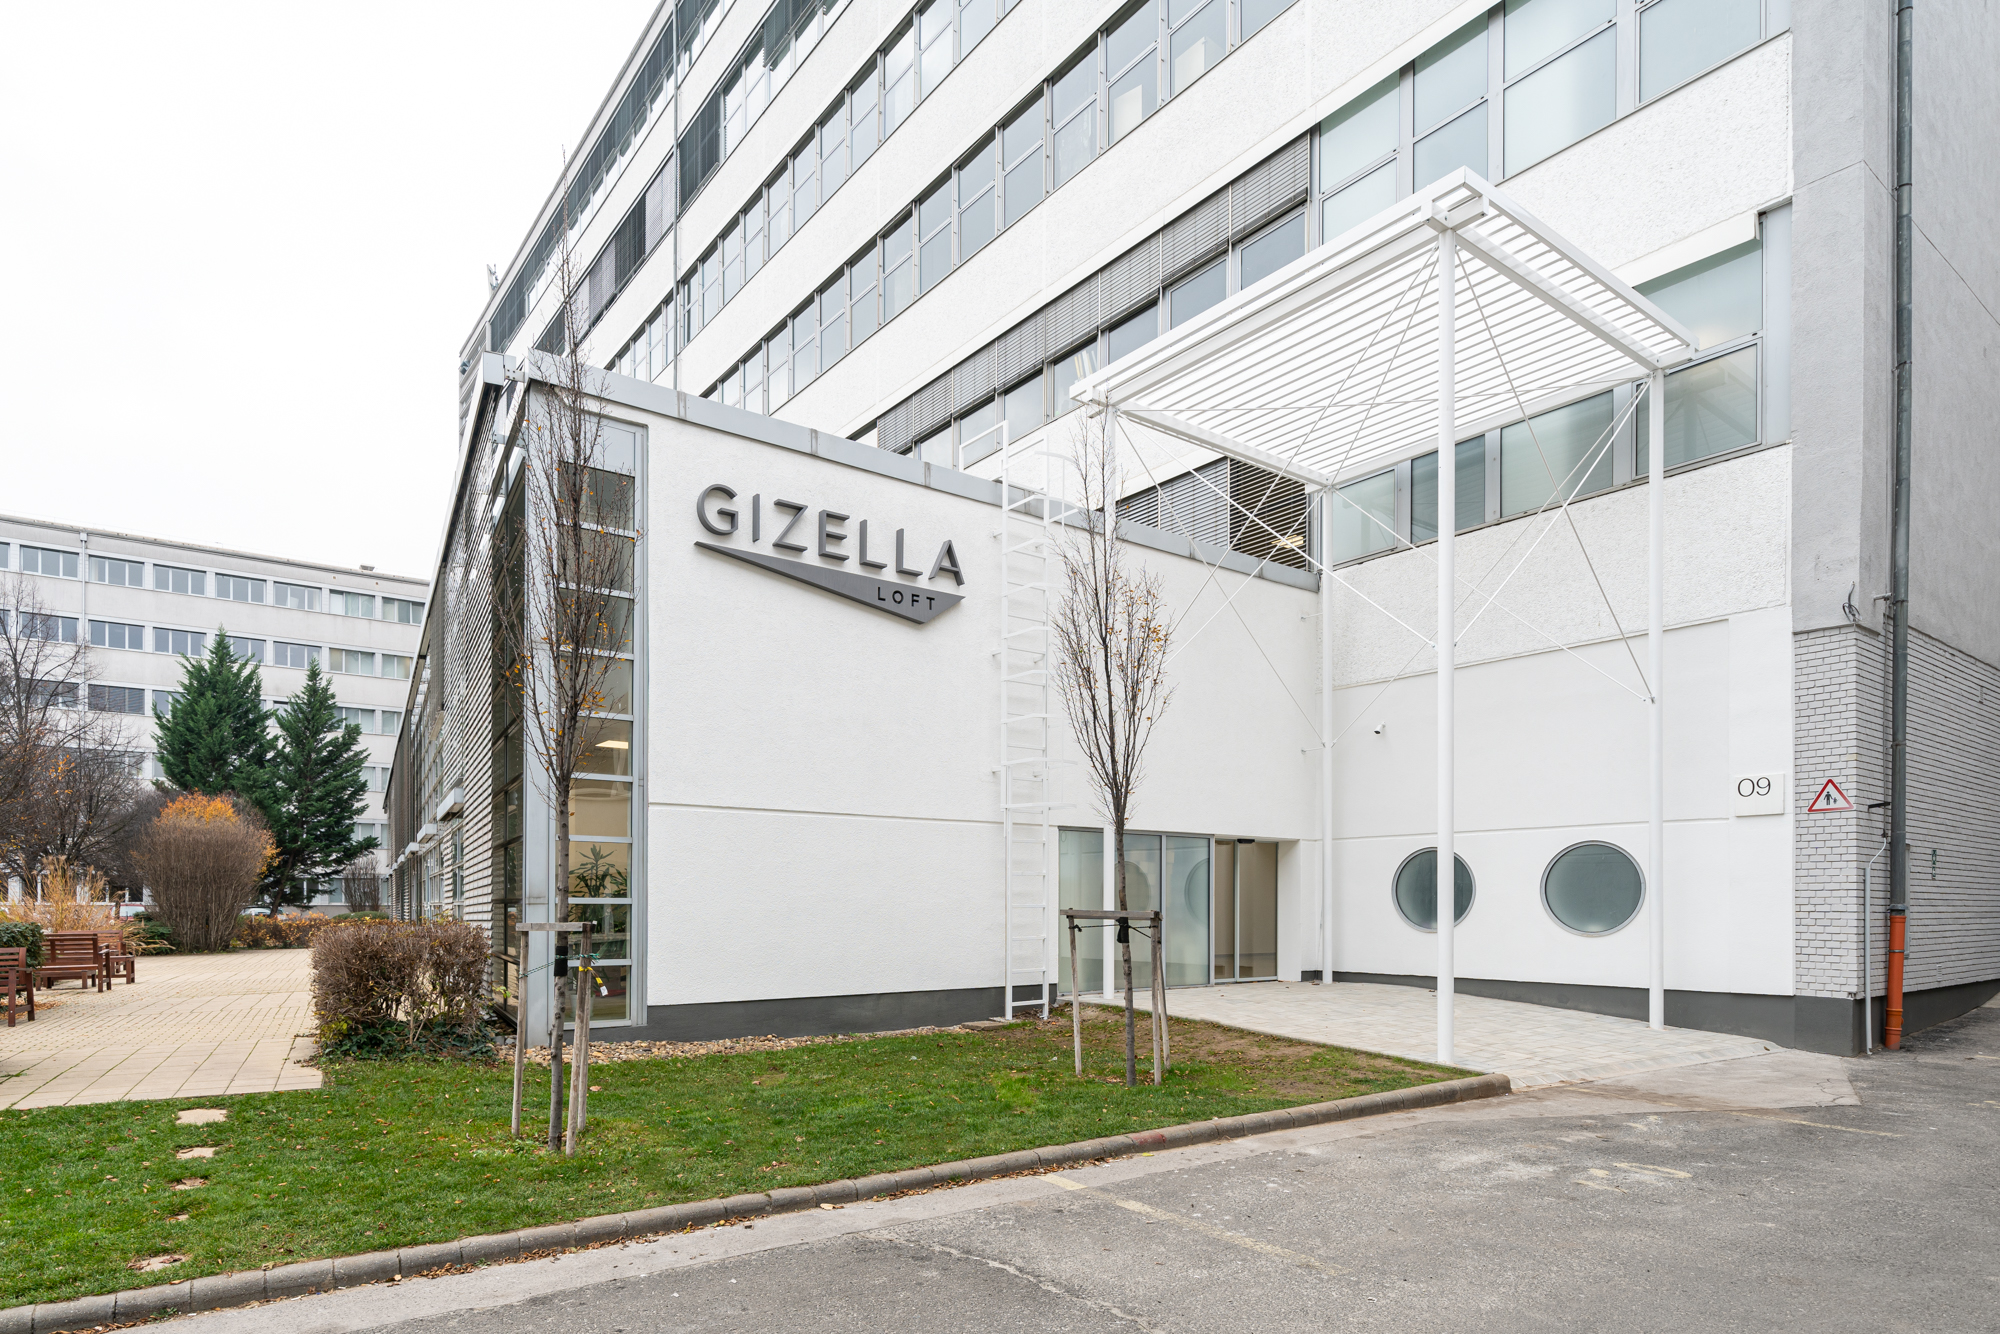 WING completes Gizella Loft office building – TÜV Rheinland takes occupancy of new offices